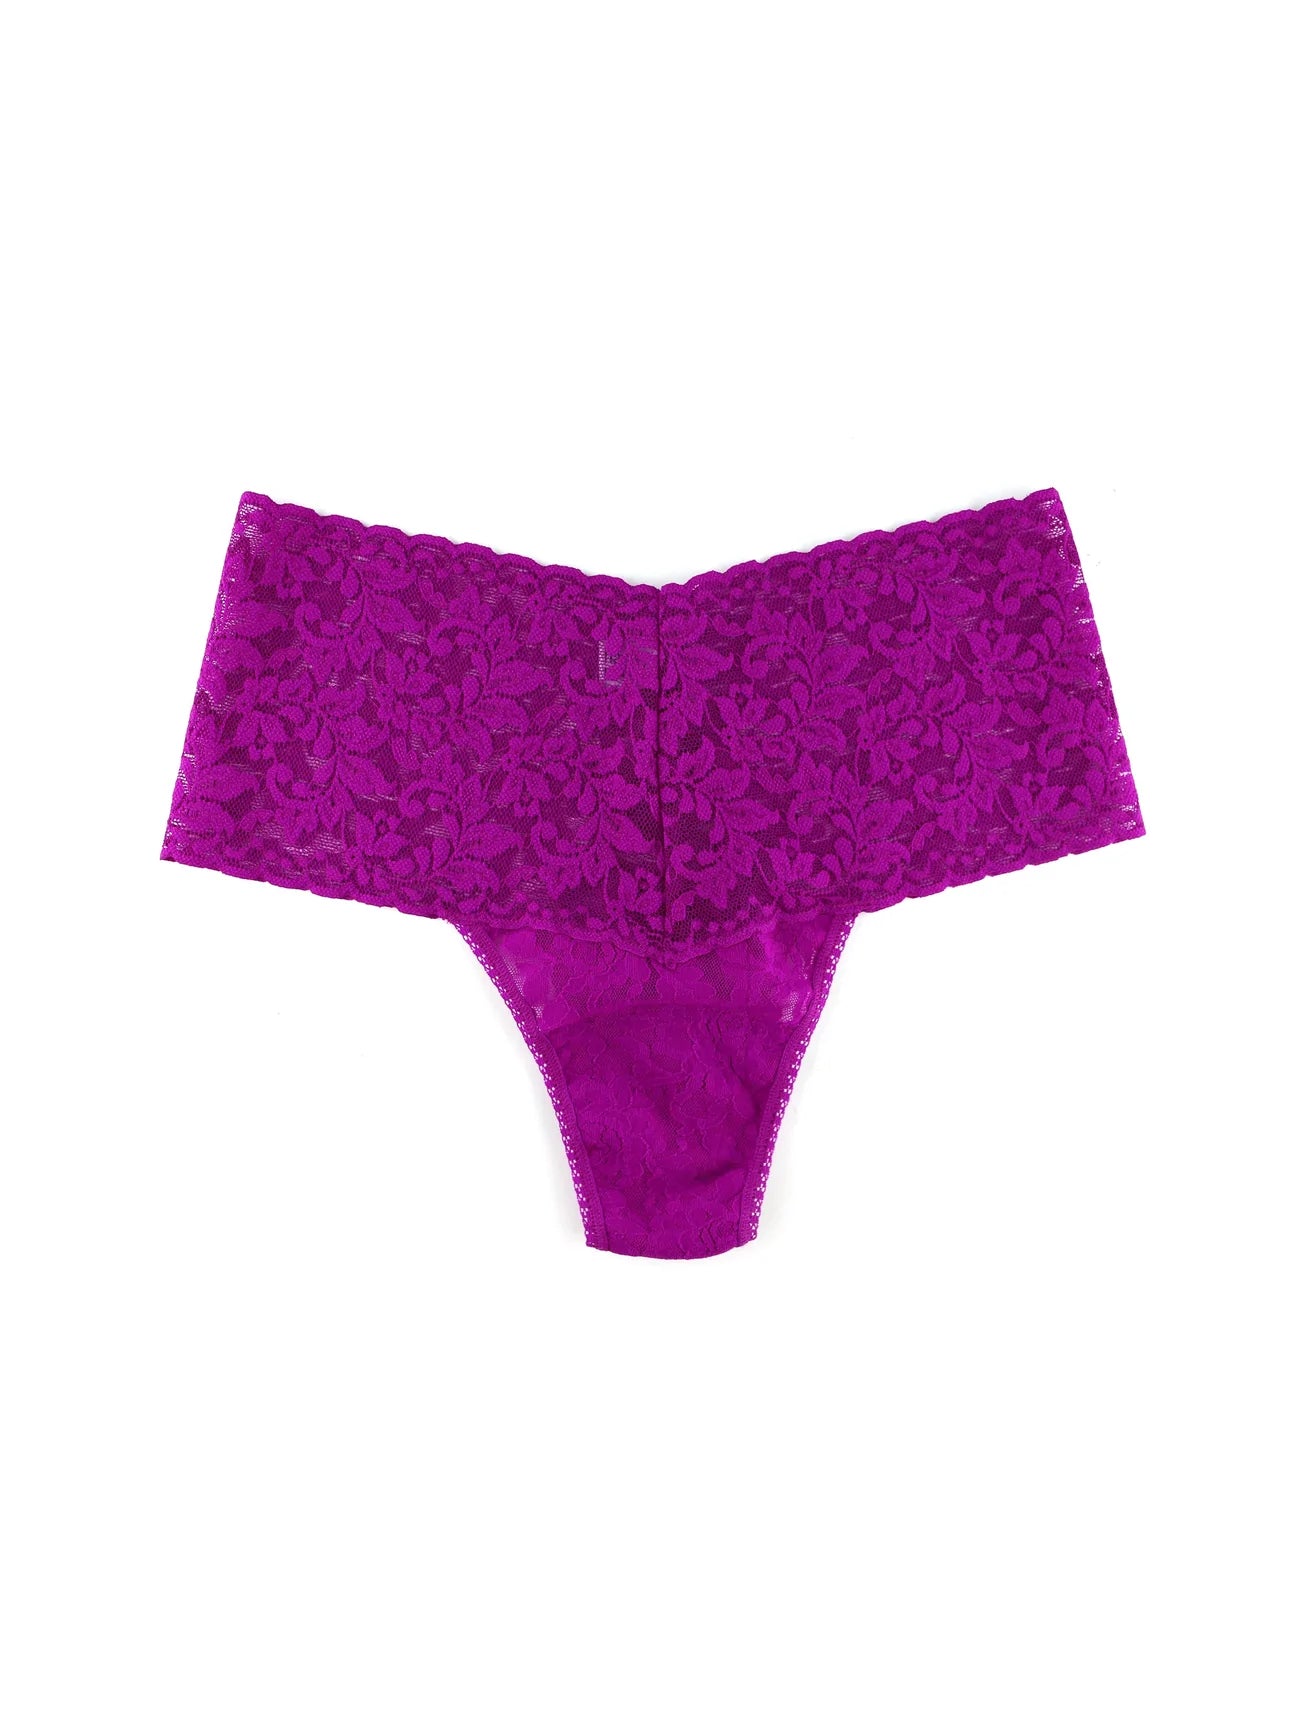 Plus Size Retro Signature Lace Thong In Countess Pink - Hanky